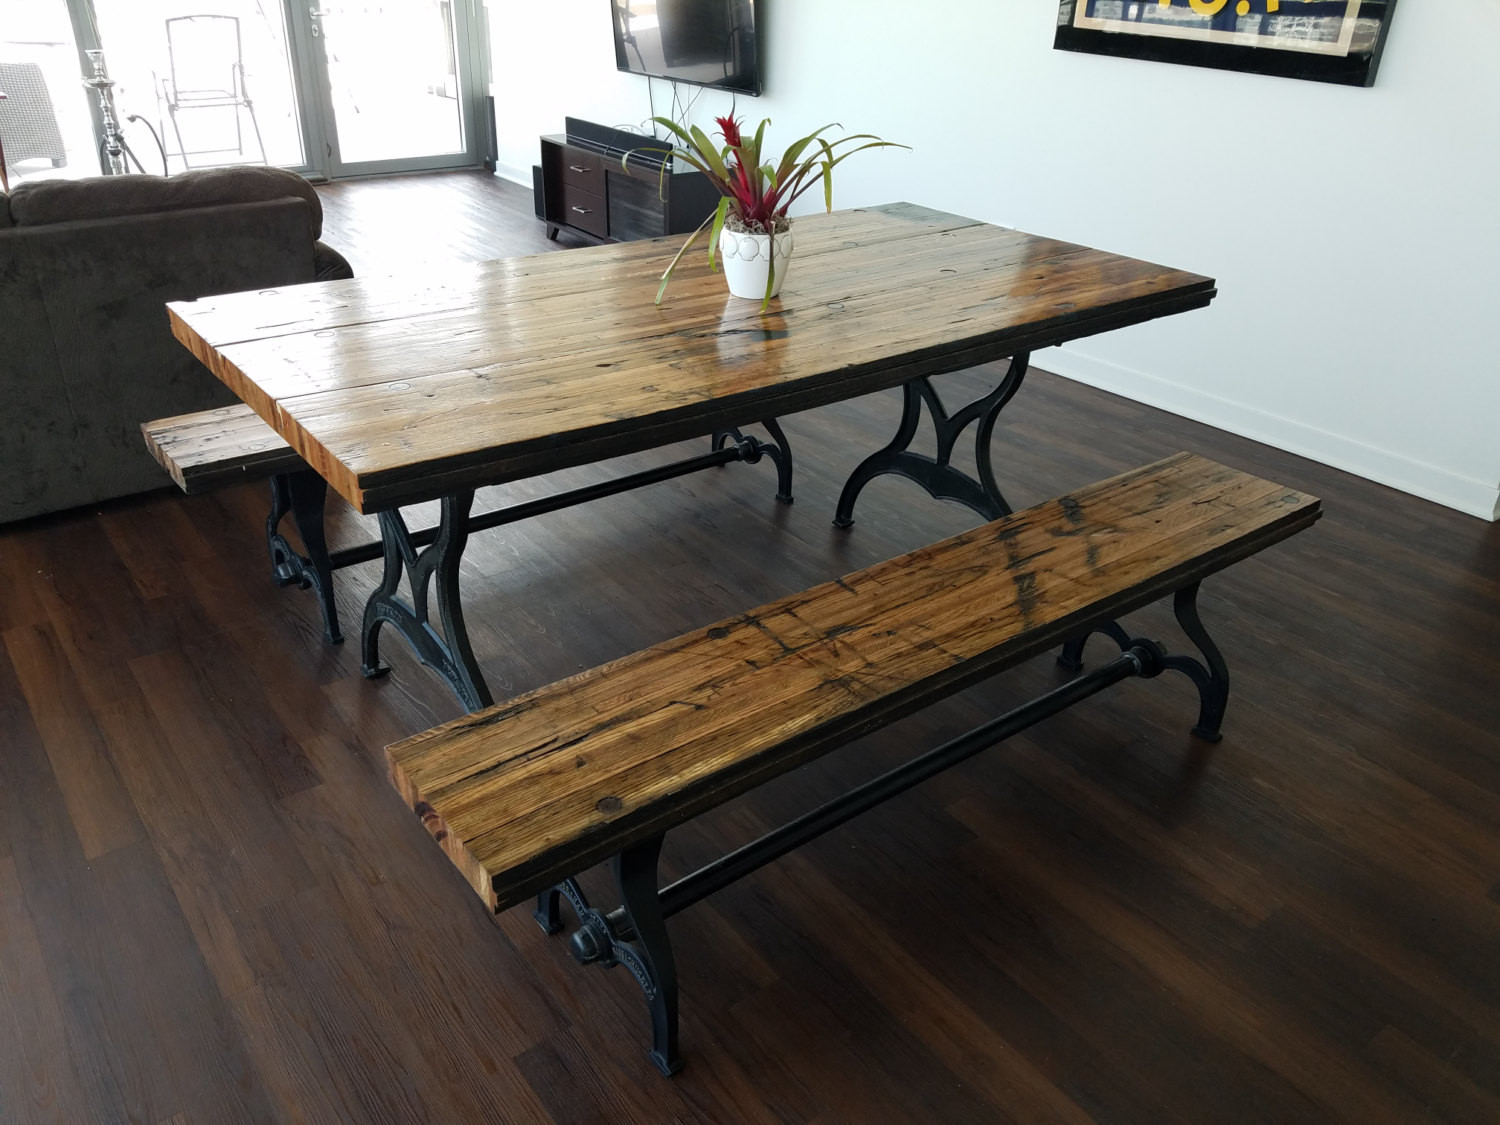 Rustic Kitchen Bench
 Reclaimed Oak Boxcar Plank Table with benches Recycled